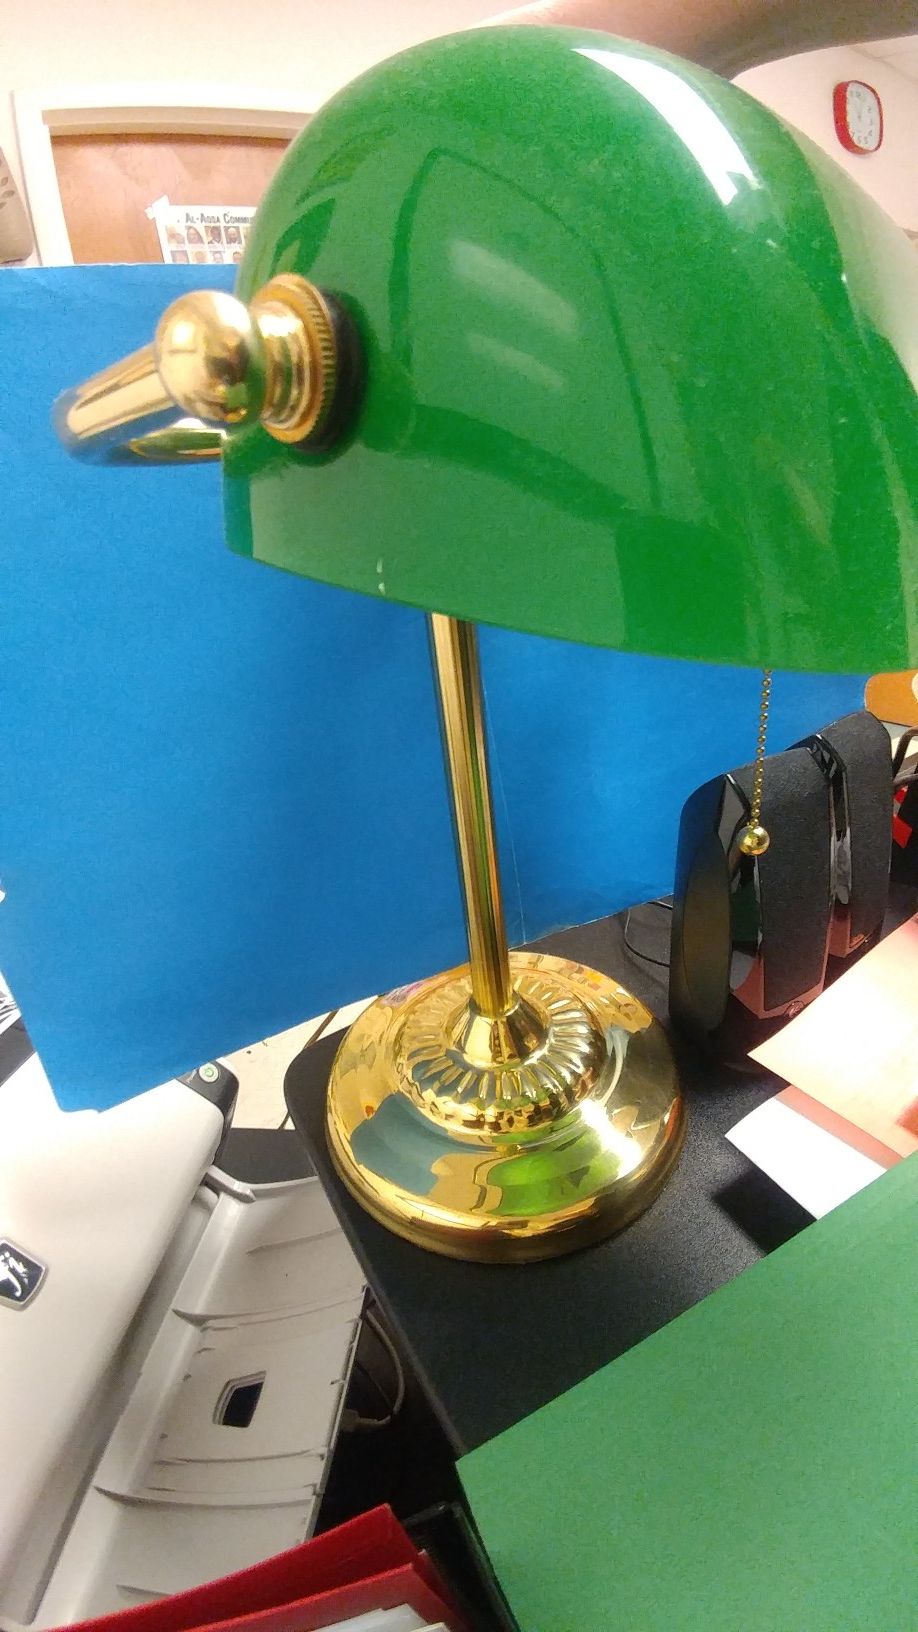 Vintage brass desk lamp with green shade